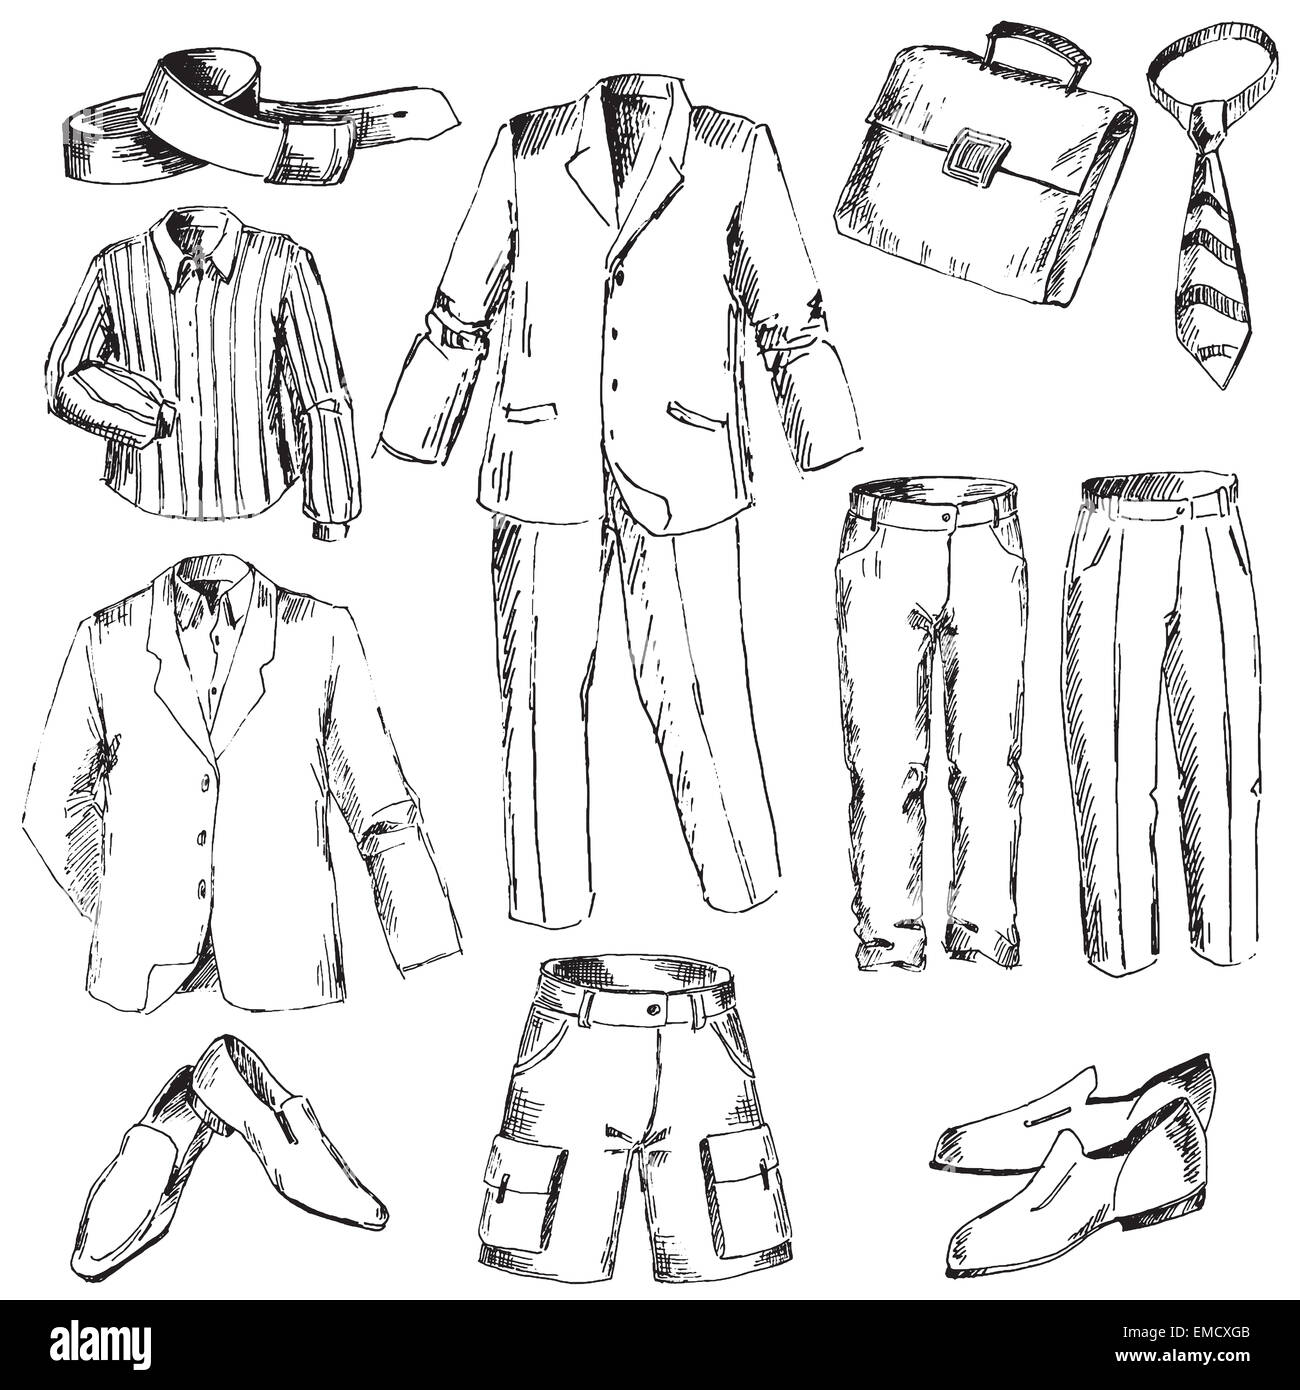 How to draw a suit easy step by step Fashion sketches men Fashion design  drawing Fabric Sketch  YouTube